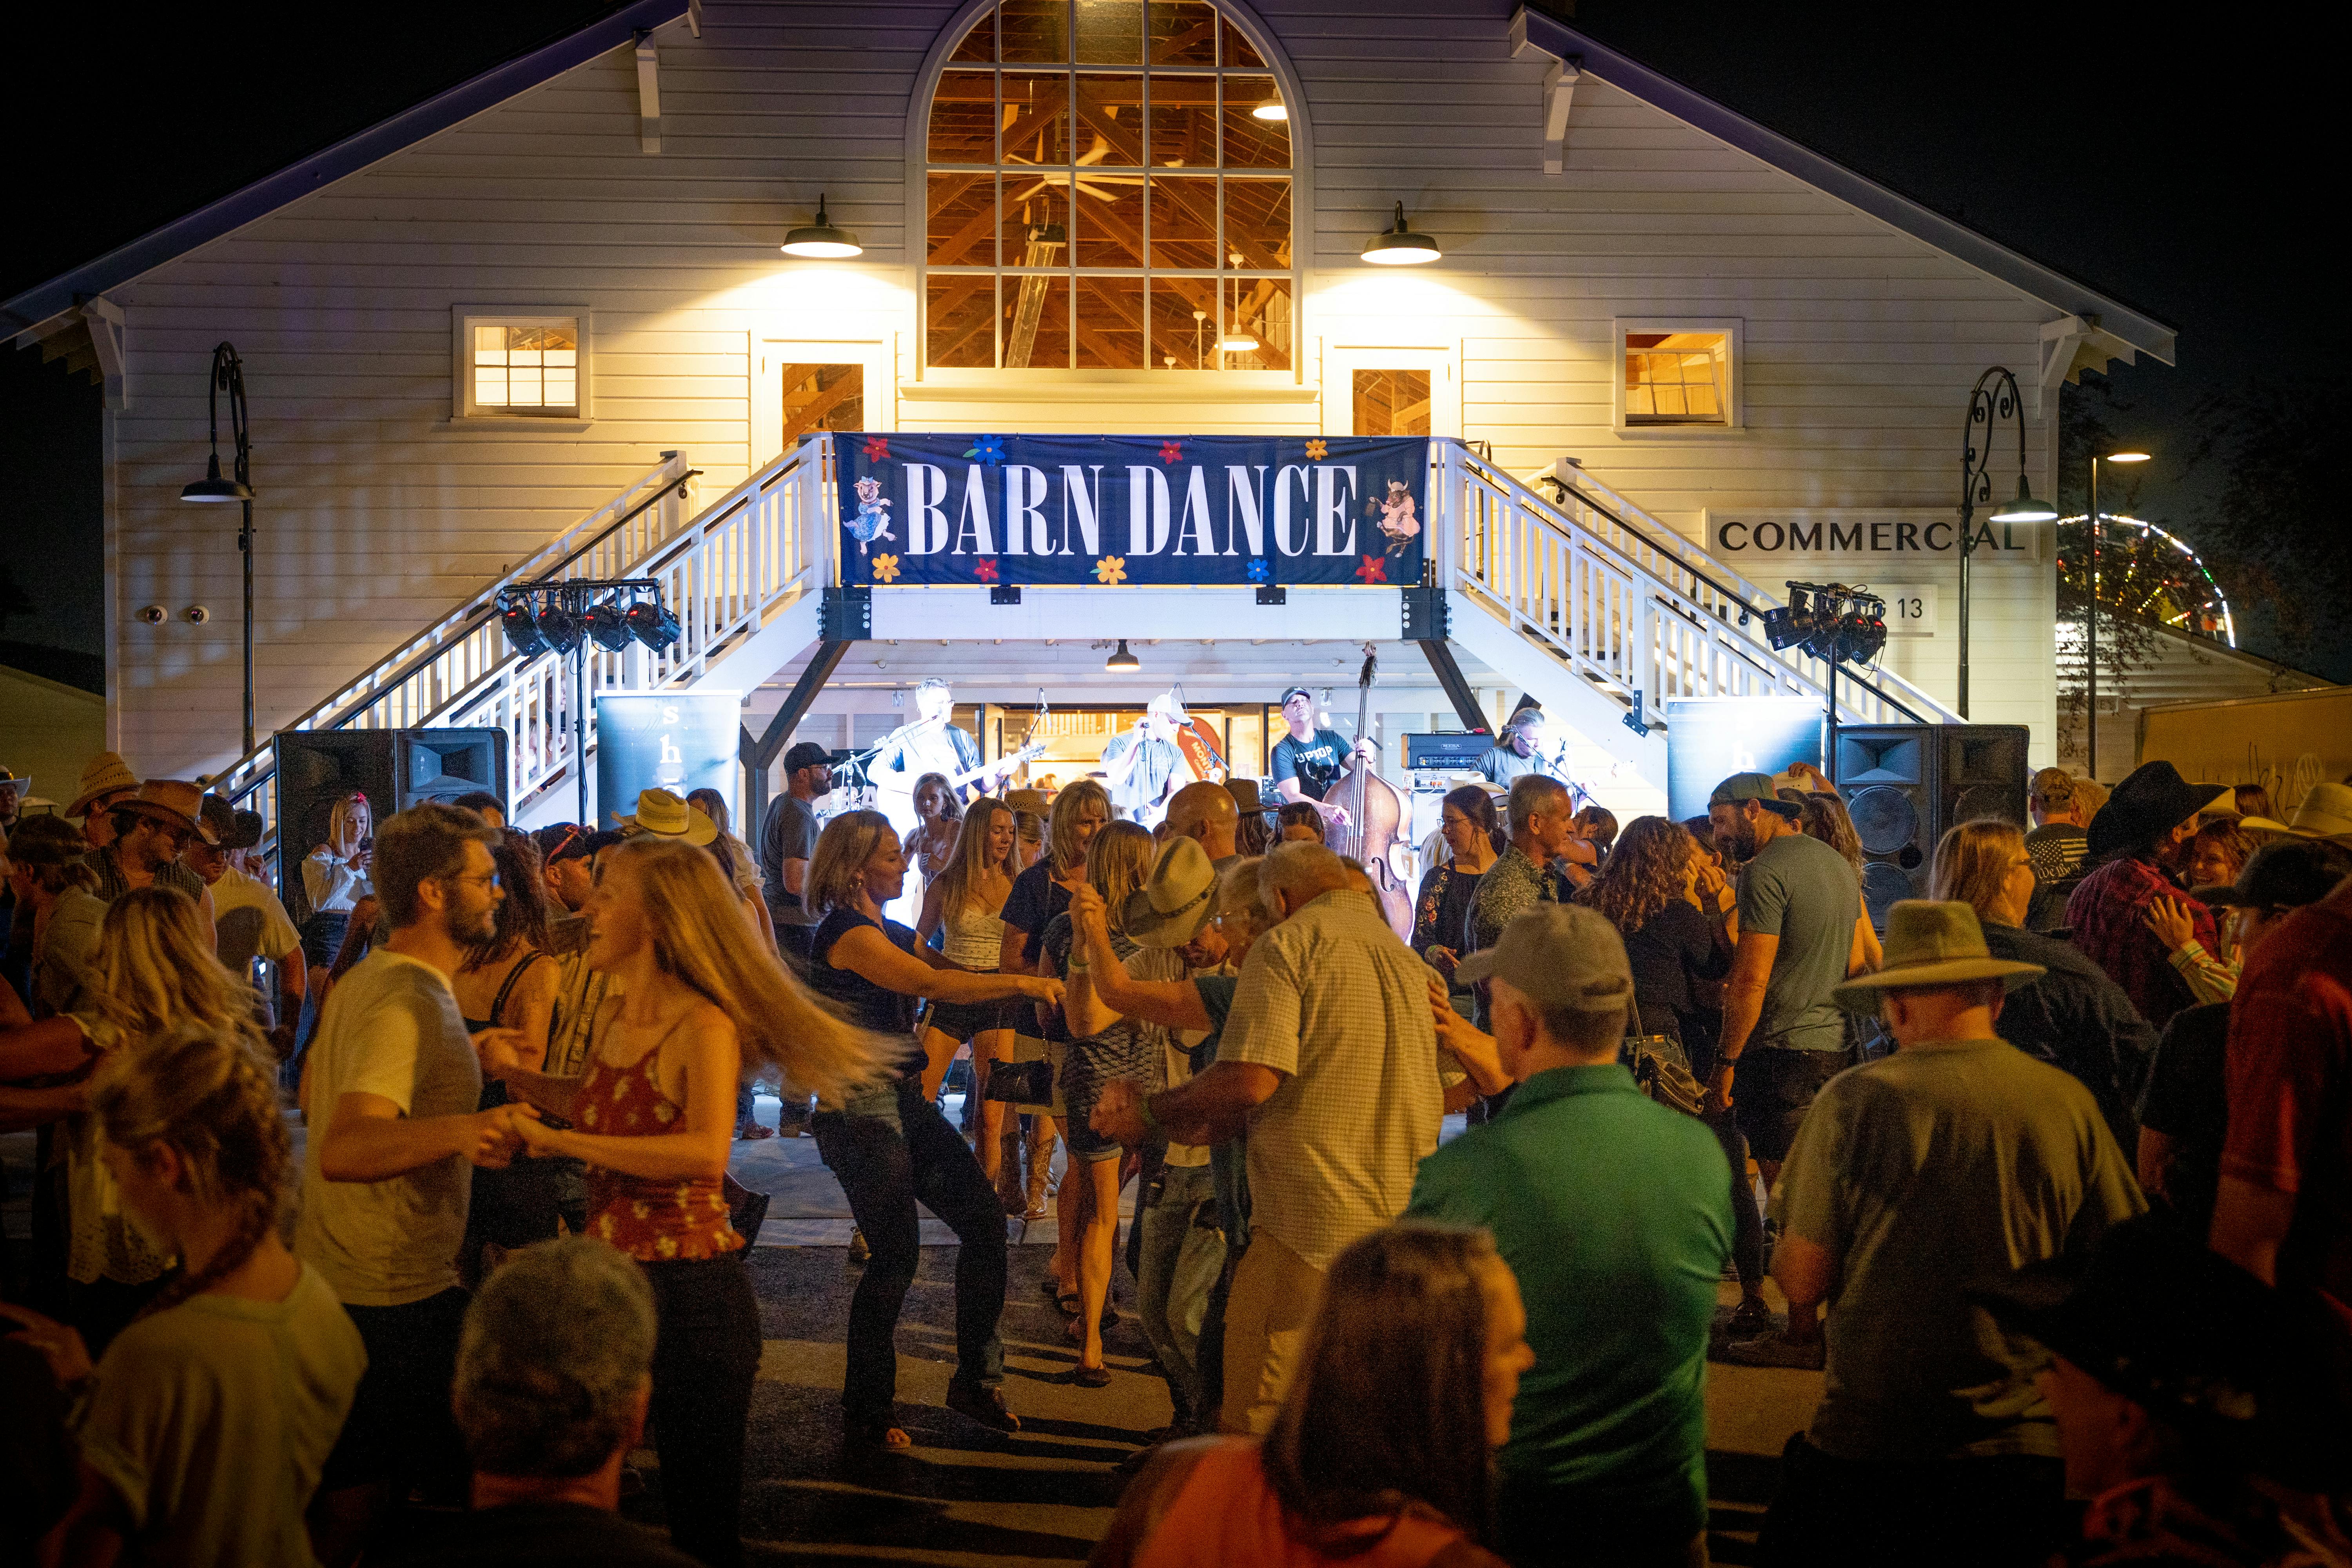 A photo of a lively barn dance in front of the Commercial Building at night. 